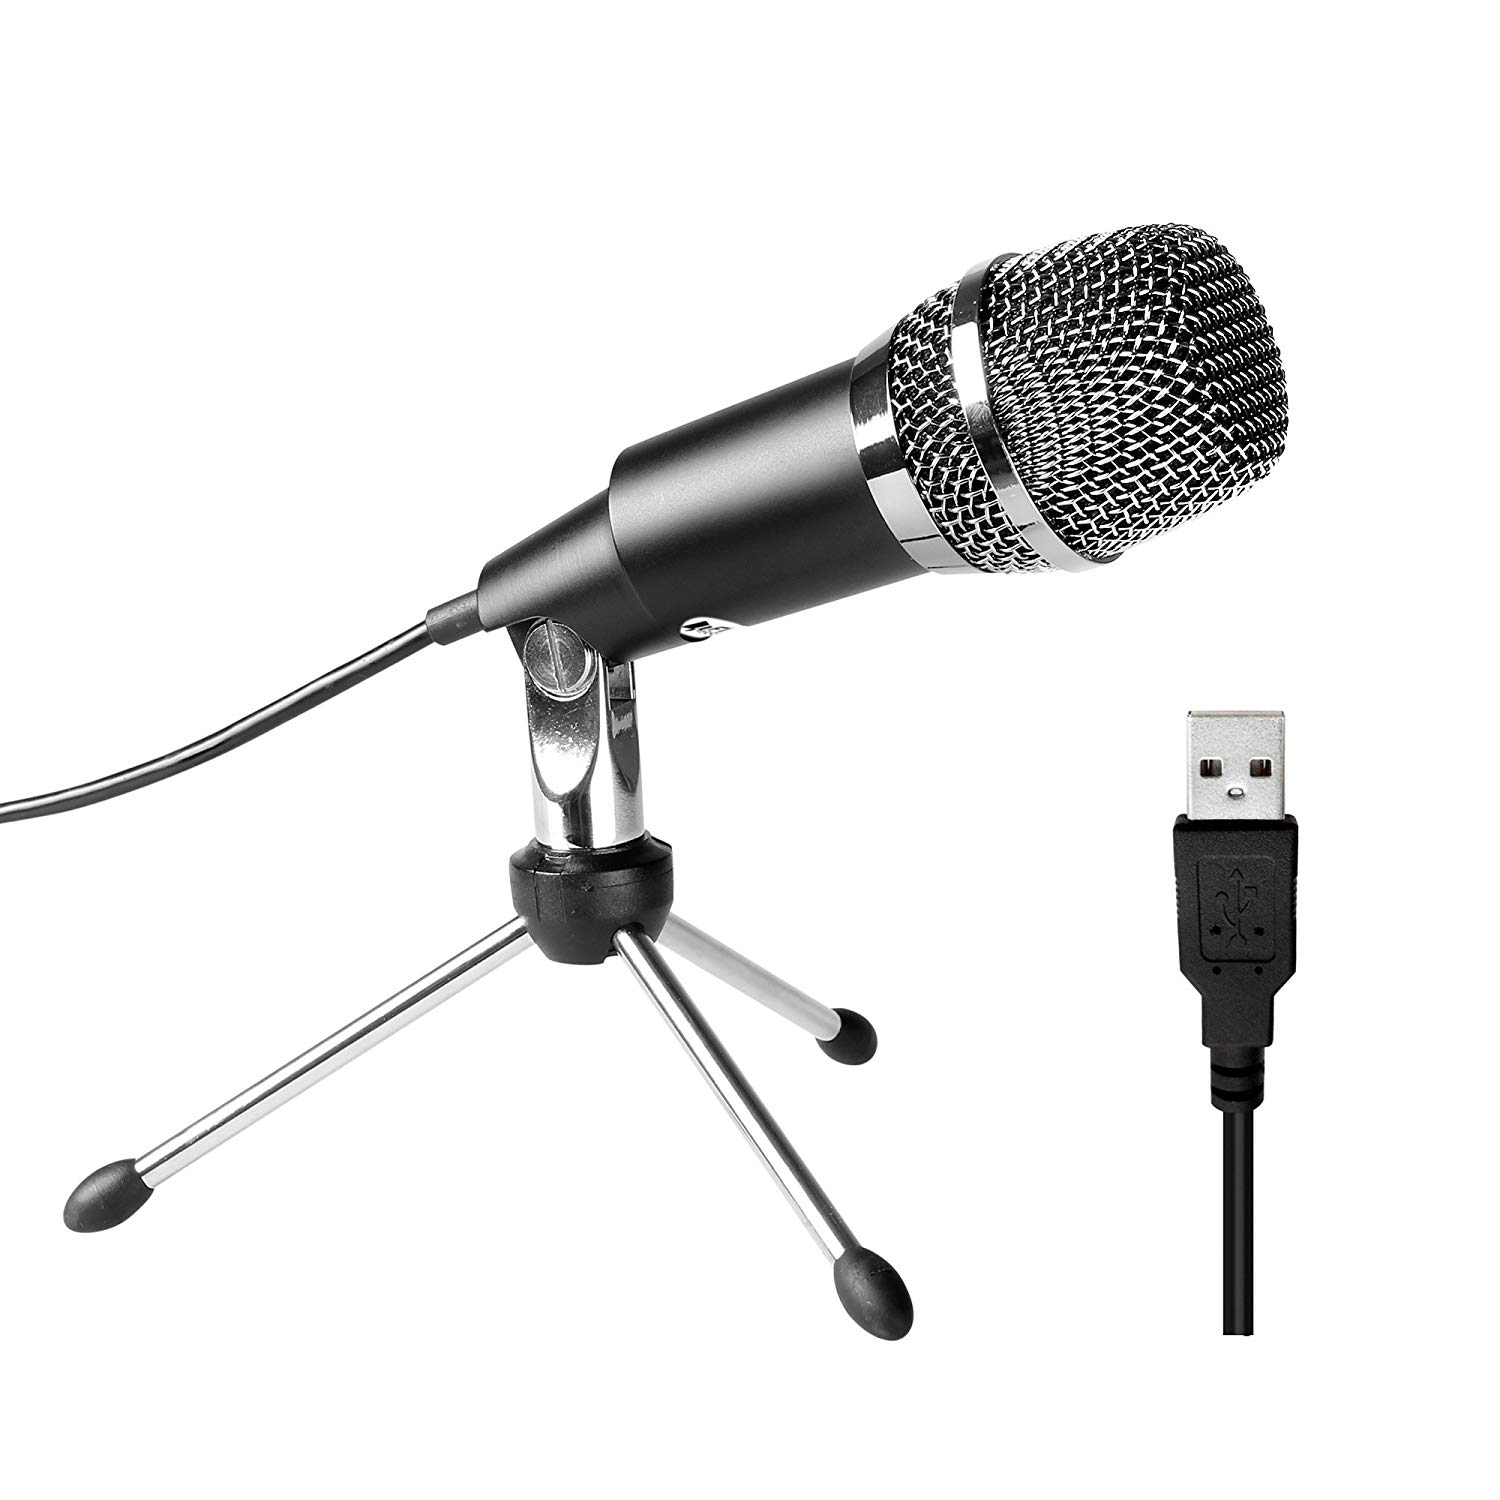 FIFINE TECHNOLOGY USB Microphone,Fifine Plug &Play Home Studio USB Condenser Microphone for Skype, Recordings for YouTube, Google Voice Search, Games(Windows/Mac)-K668